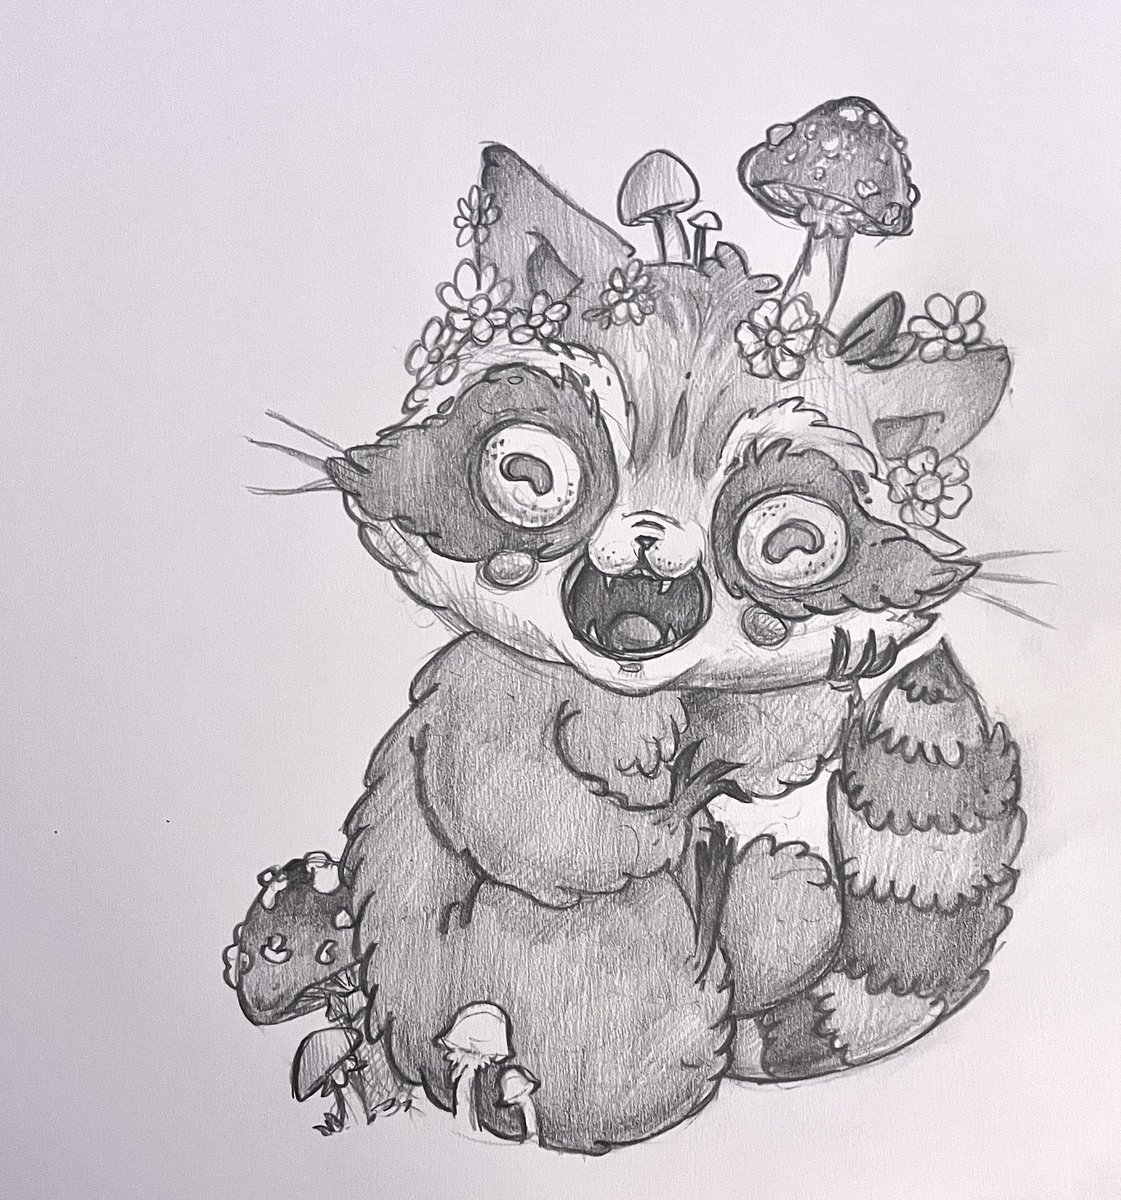 I’ve been exploring in my sketchbook a lot lately and this fuzzy trash panda popped out. It was a lot of fun playing with the lines, shapes and the graphite itself.

#raccoon #raccoonart #art #artist #femaleartist #nature #smushbox #trashpanda #kawaii #mushroom #sketchbook